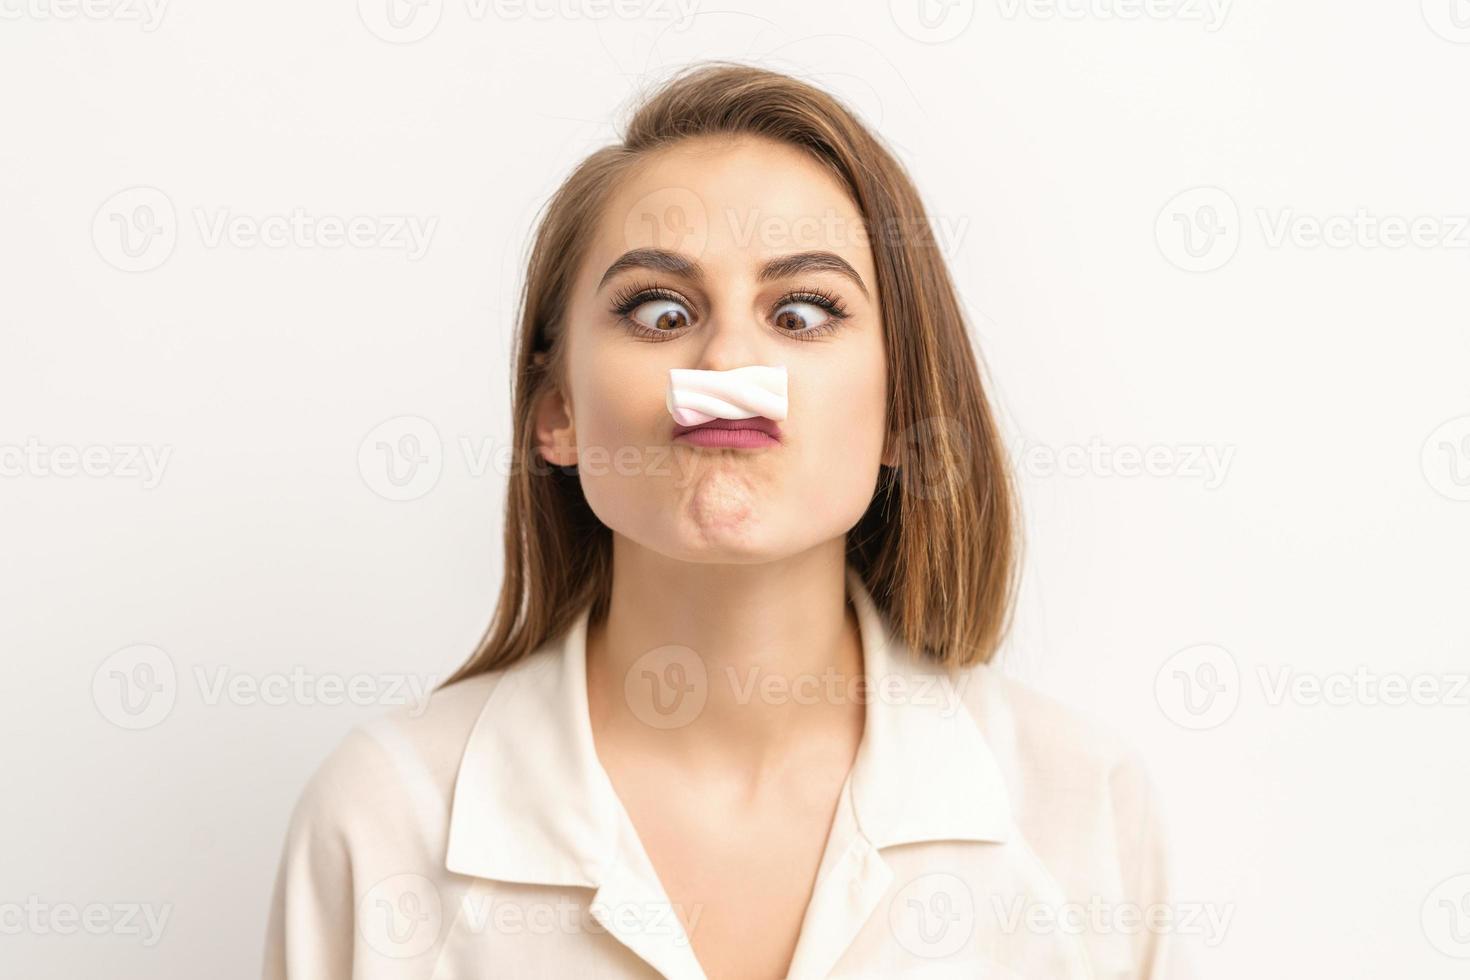 Woman with candy marshmallow-like mustache photo